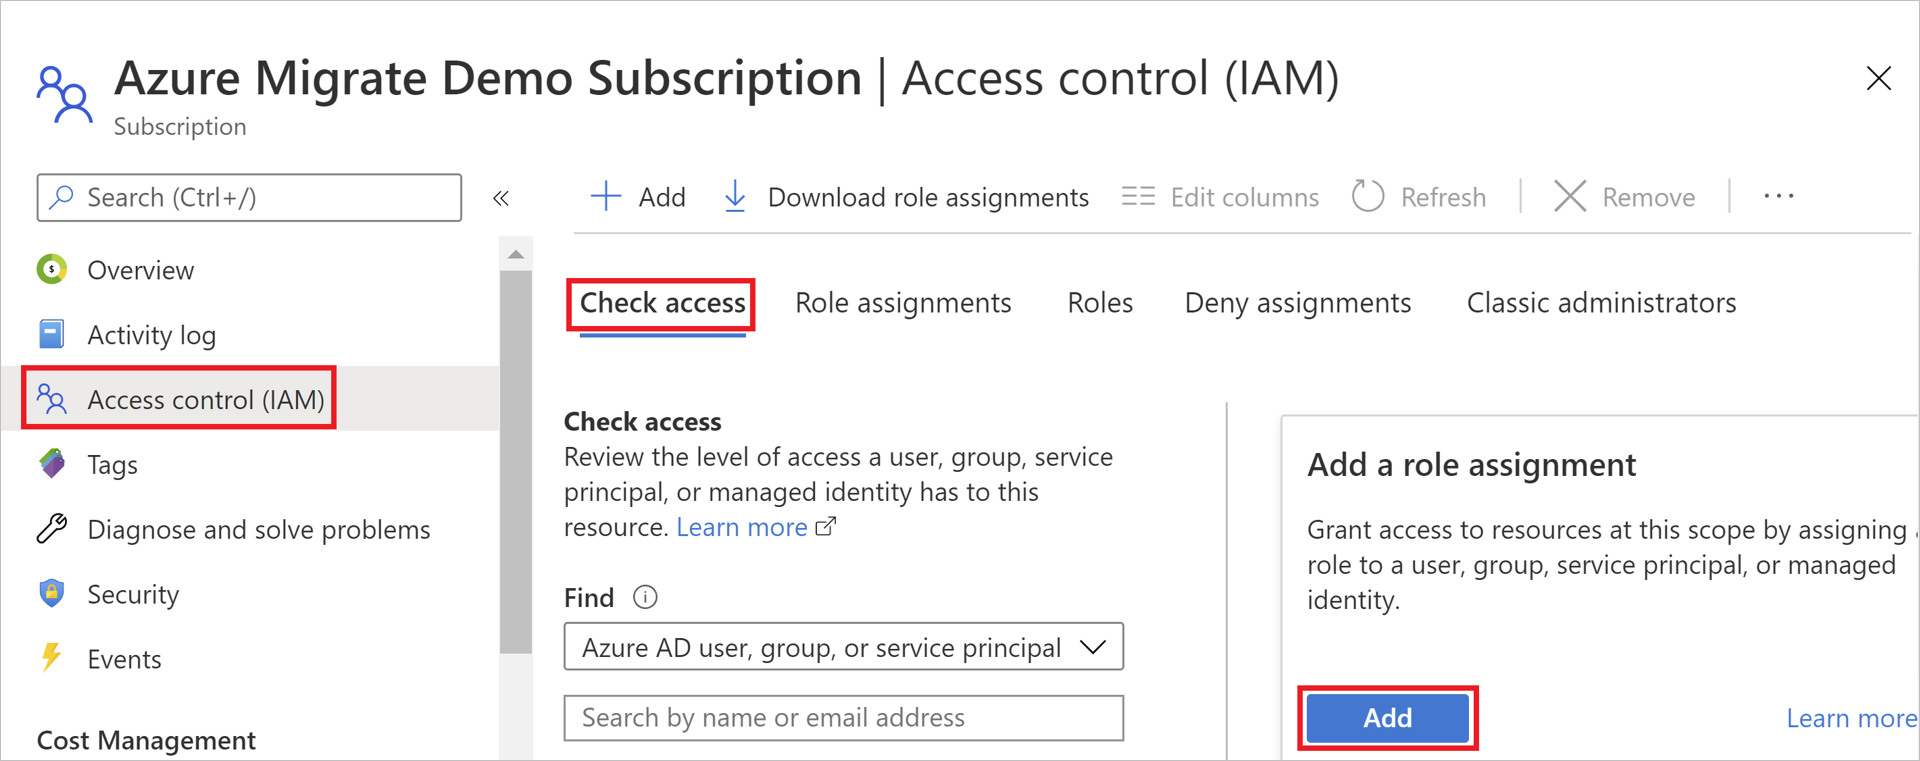 Search for a user account to check access and assign a role.